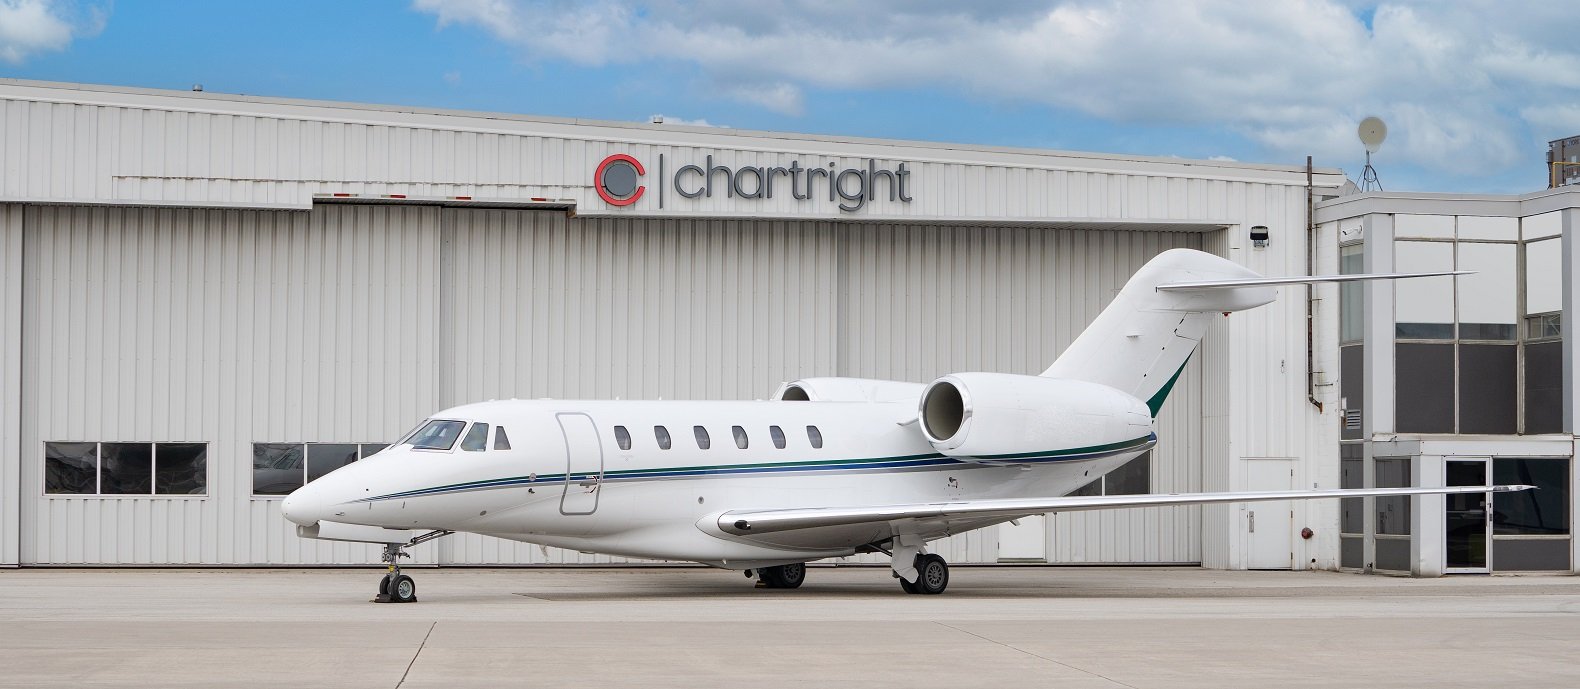 Chartright Air Group adds two new Cessna aircraft